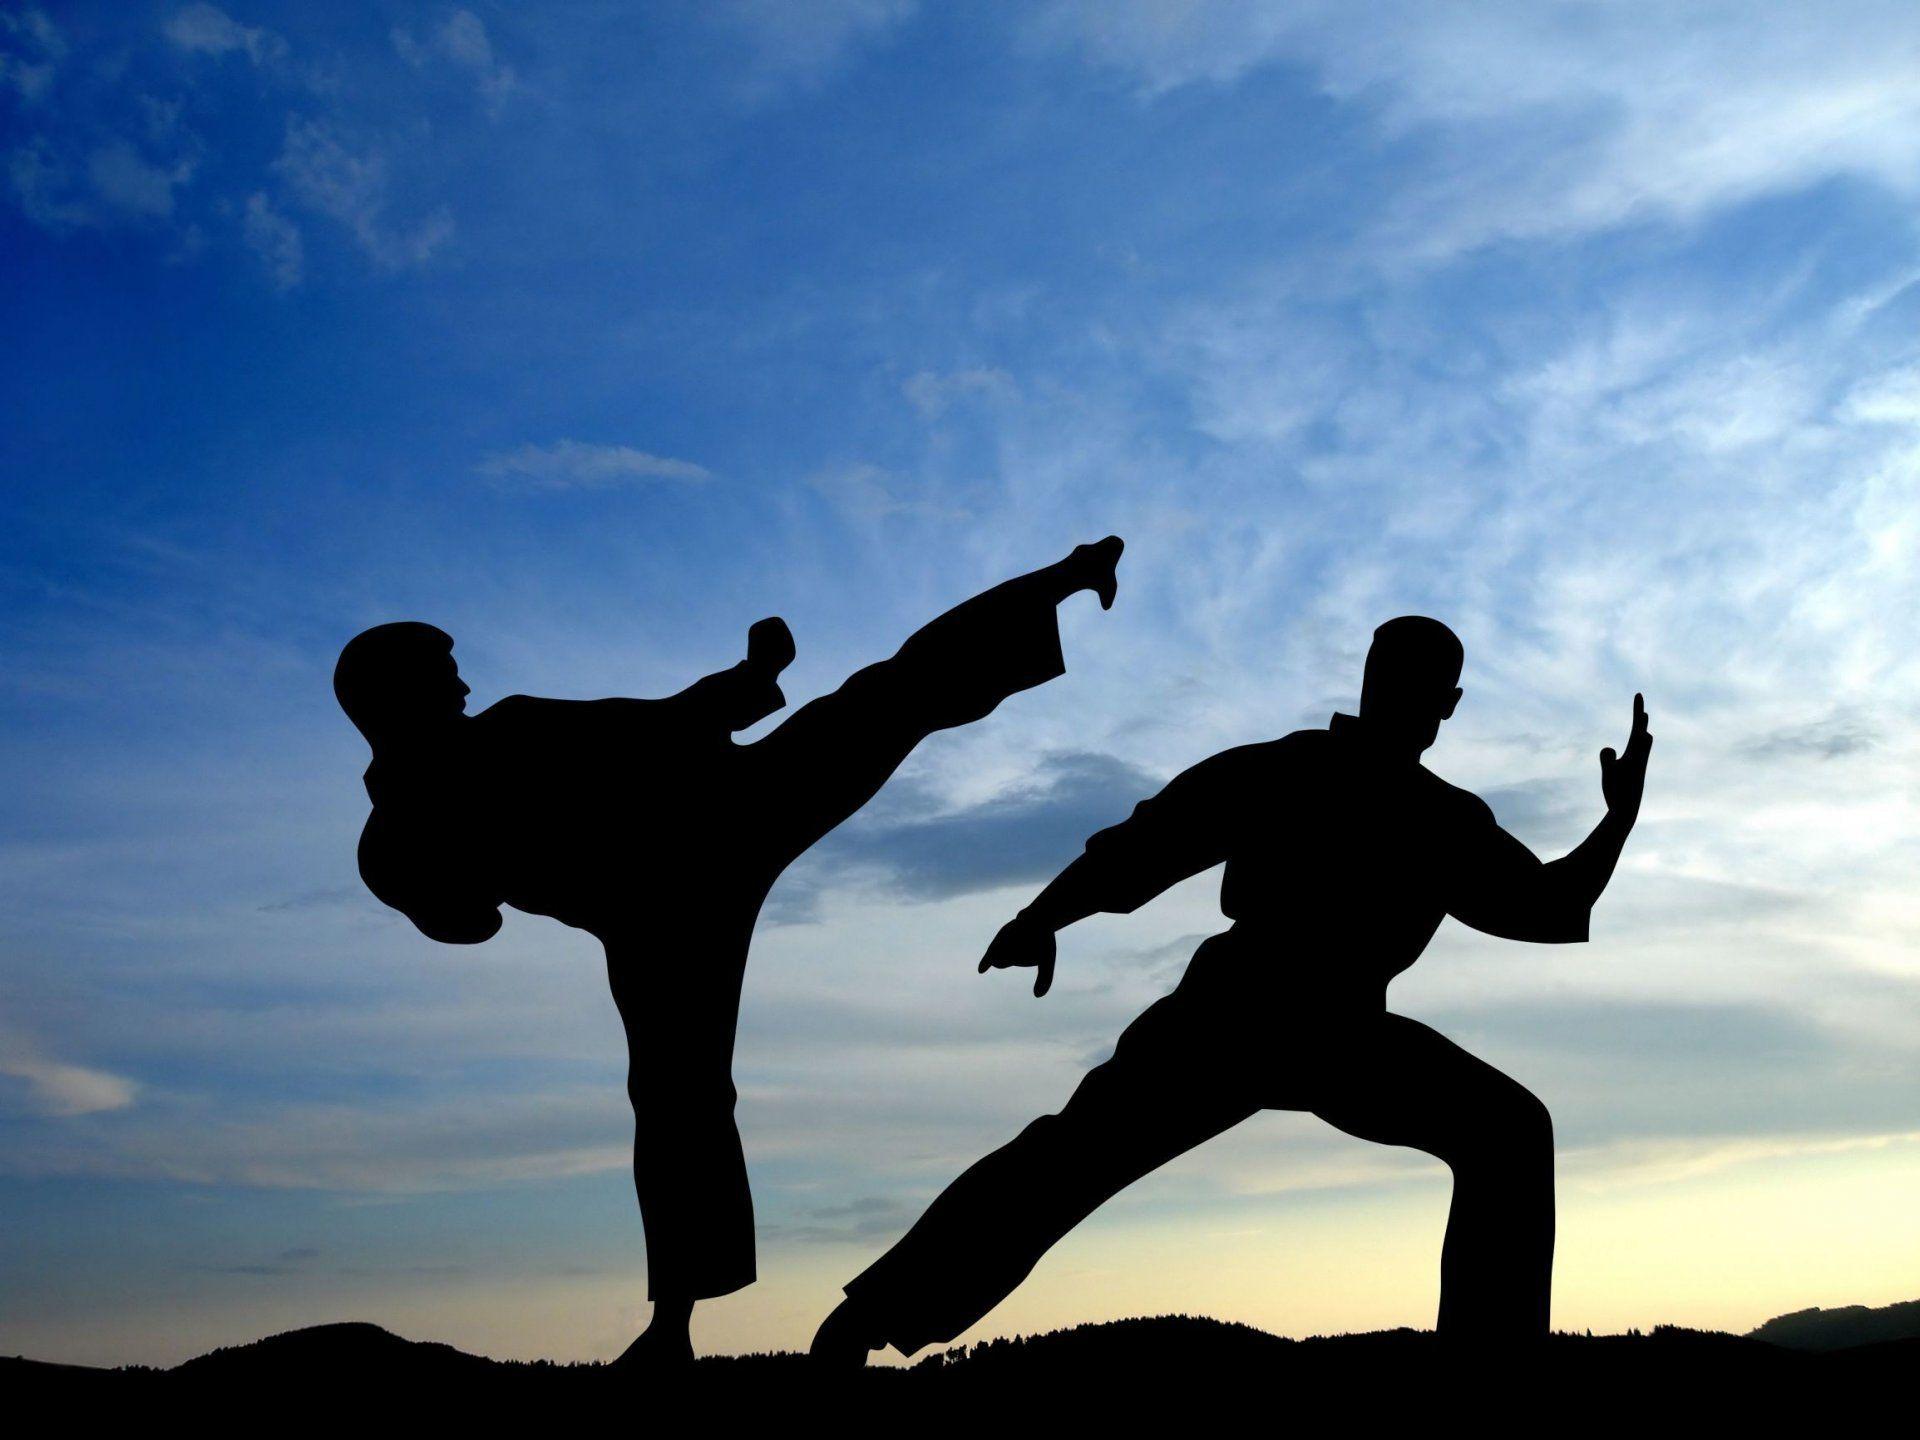 sports karate fight outright shadow silhouettes men strike martial